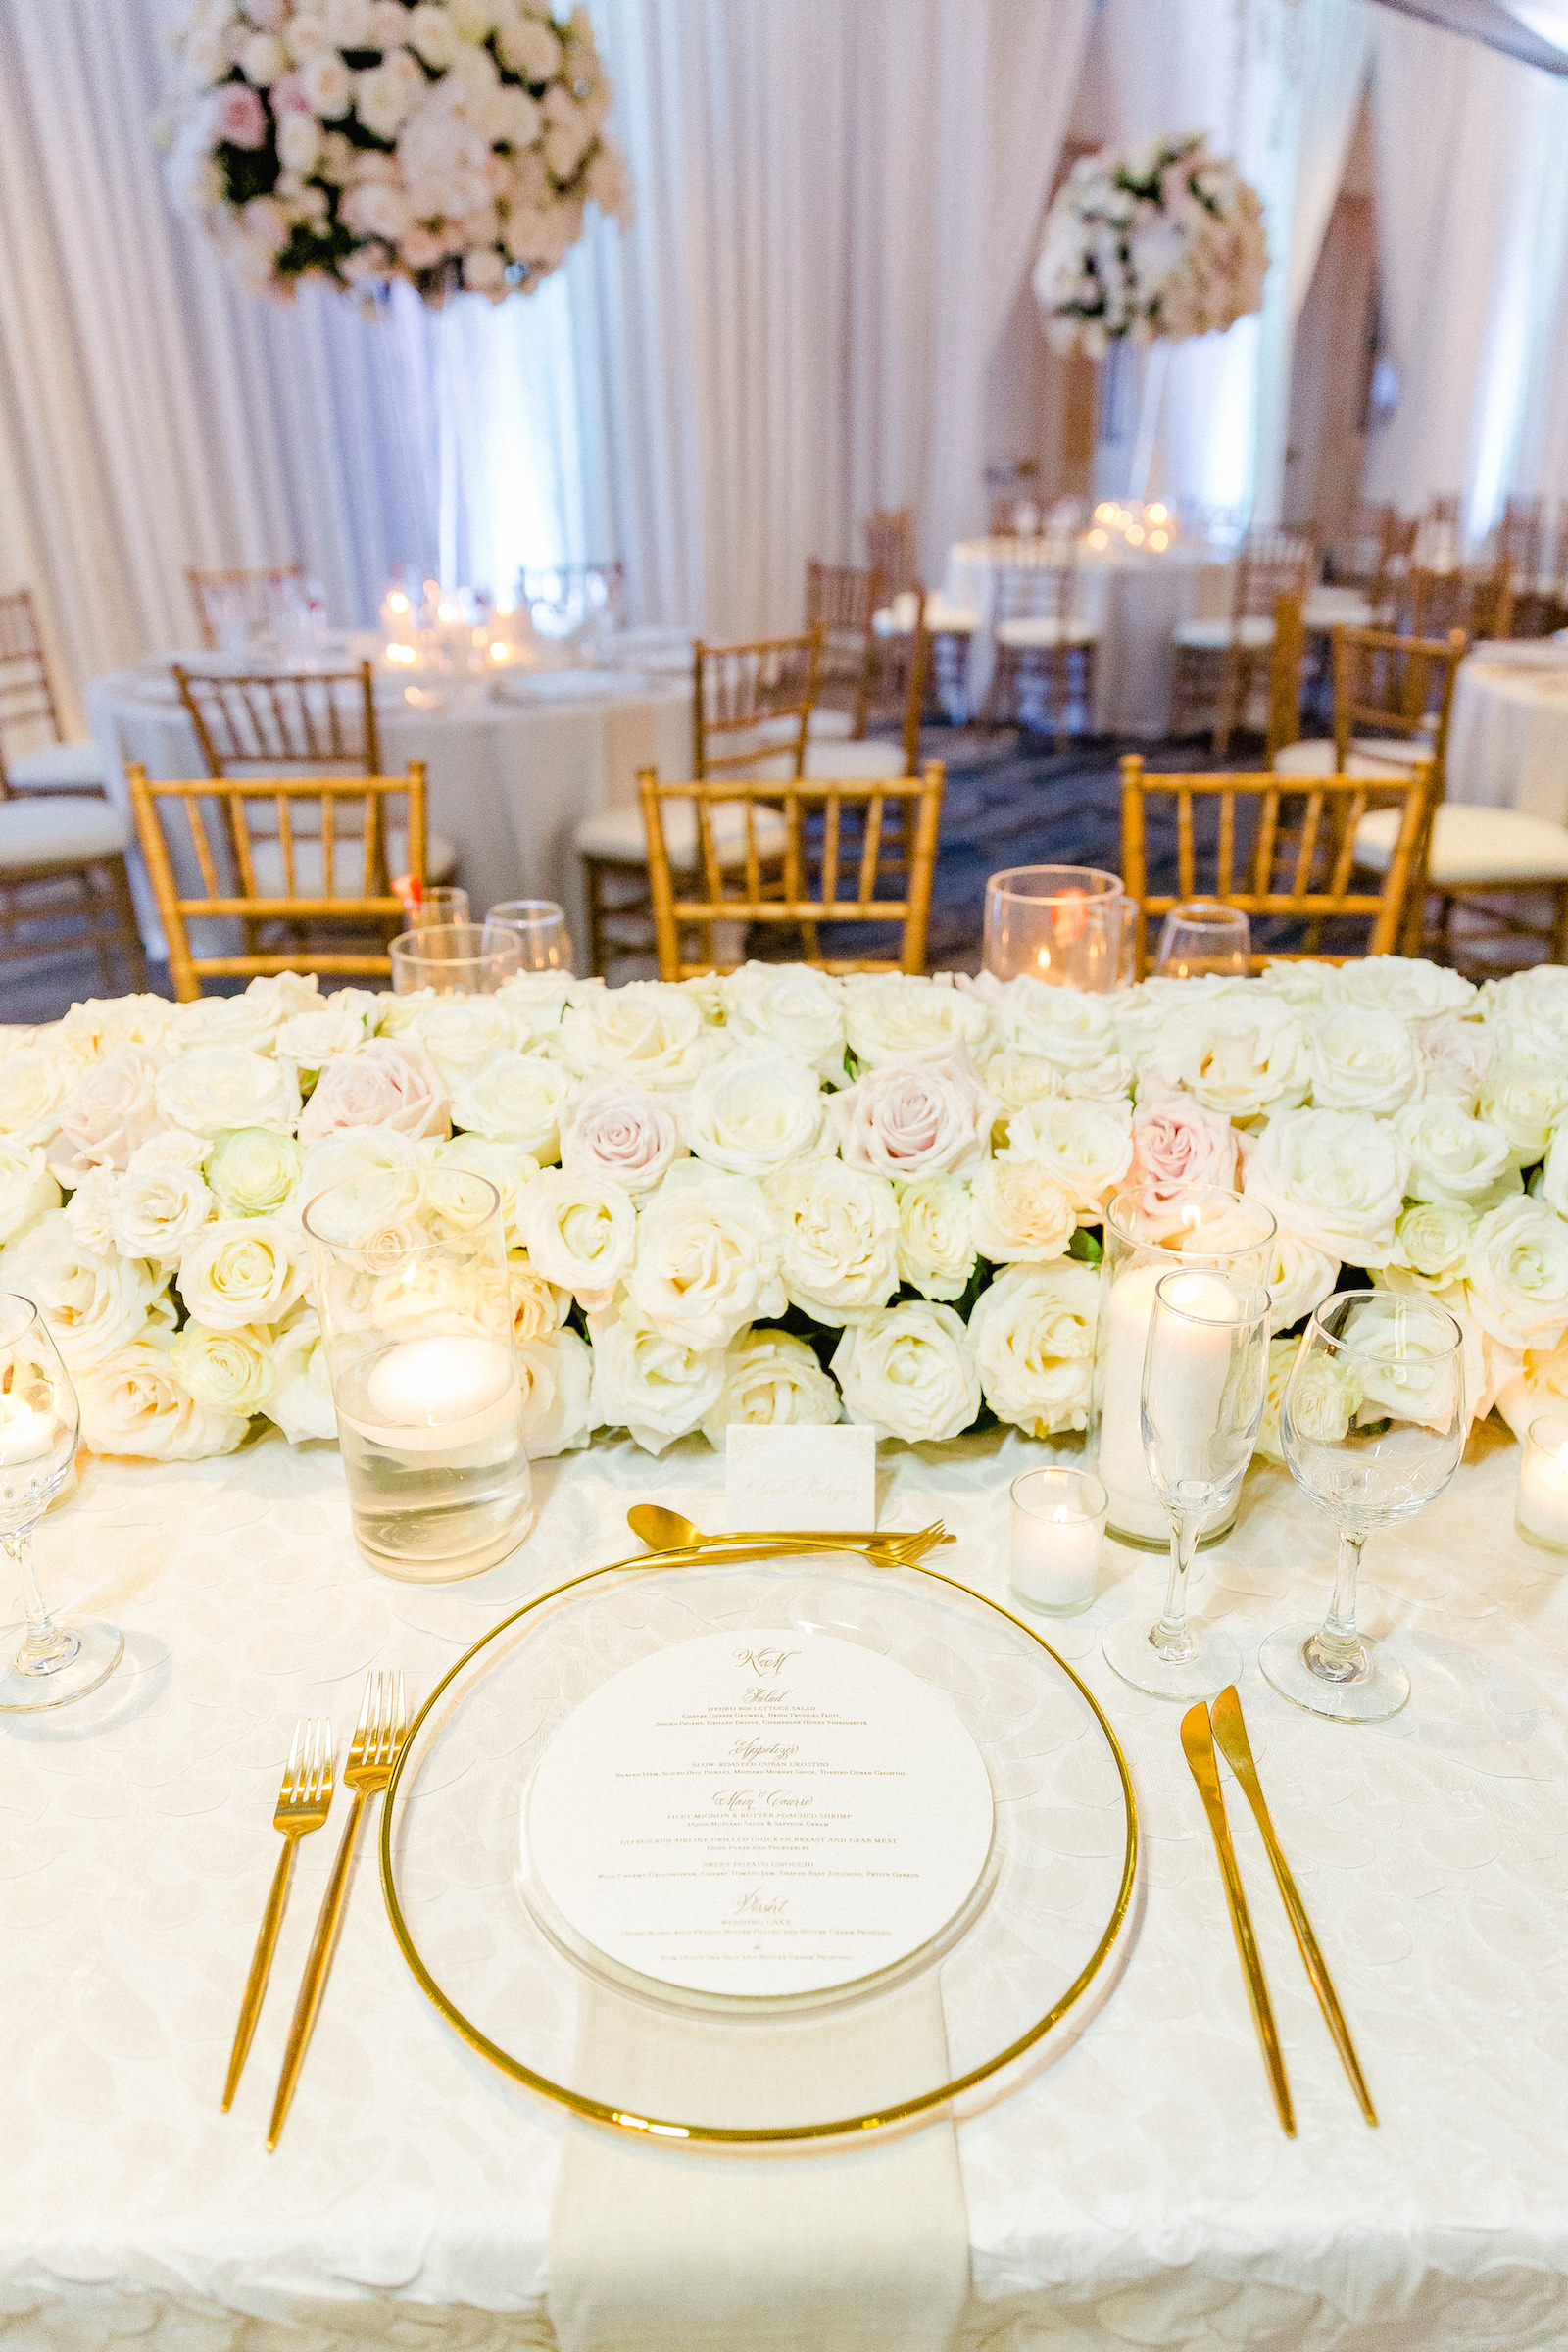 White and Gold Romantic Wedding Reception Decor, Gold Flaftware, Clear Glass and Gold Rimmed Charger, Candlesticks and White and Blush Pink Roses Lush Table Long Floral Centerpiece